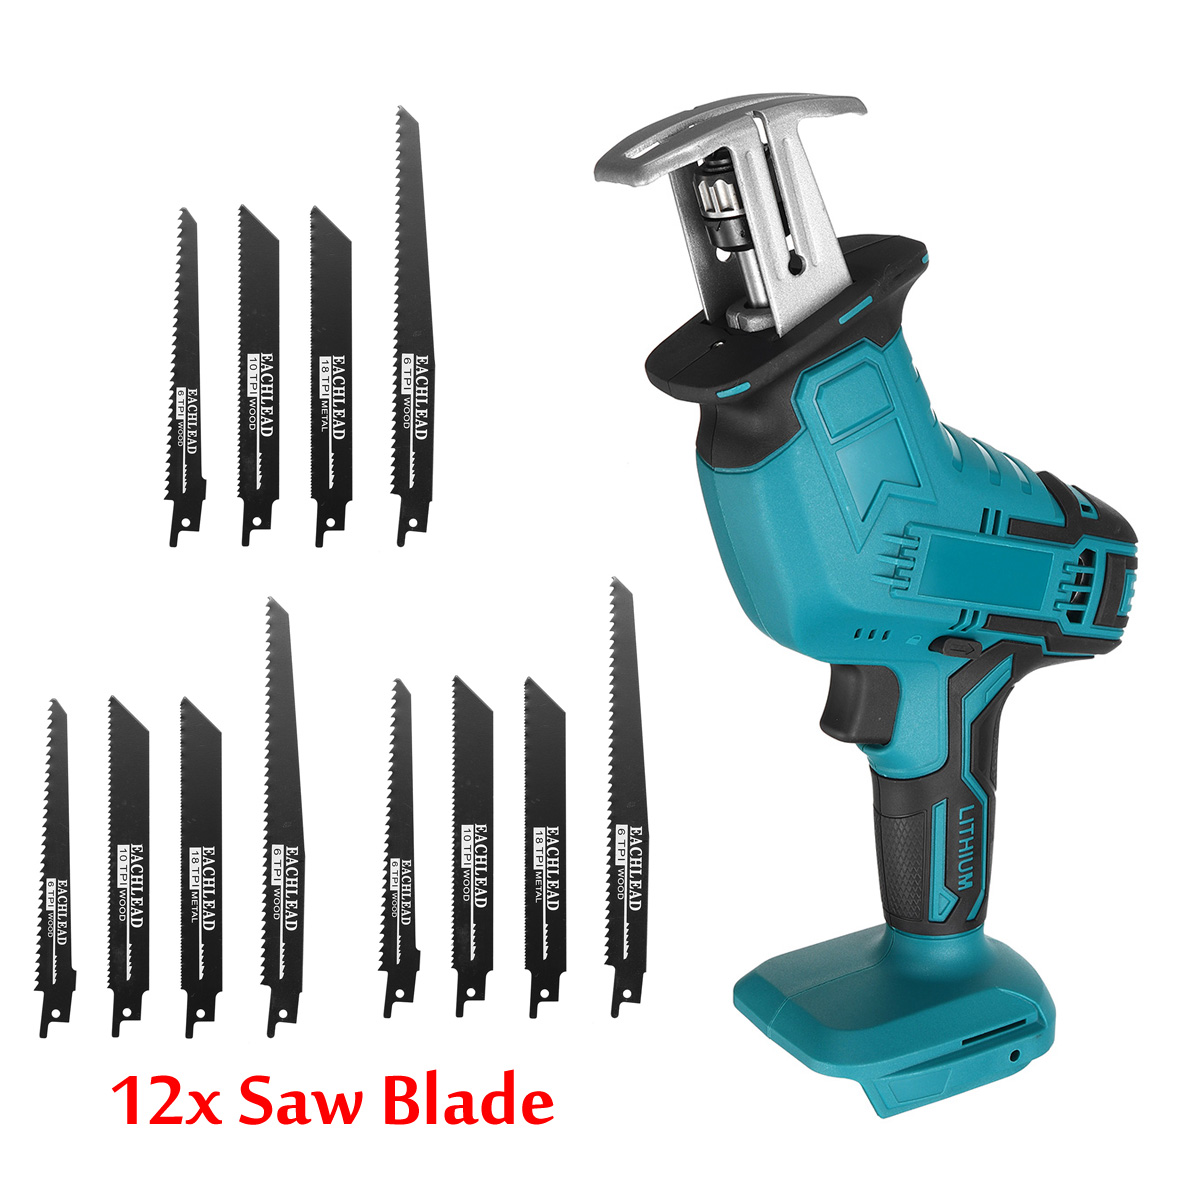 Cordless Electric Saw Reciprocating Saw with 12 Saw Blades for Wood Metal Plastic Cutting machine for Makita 18V Battery